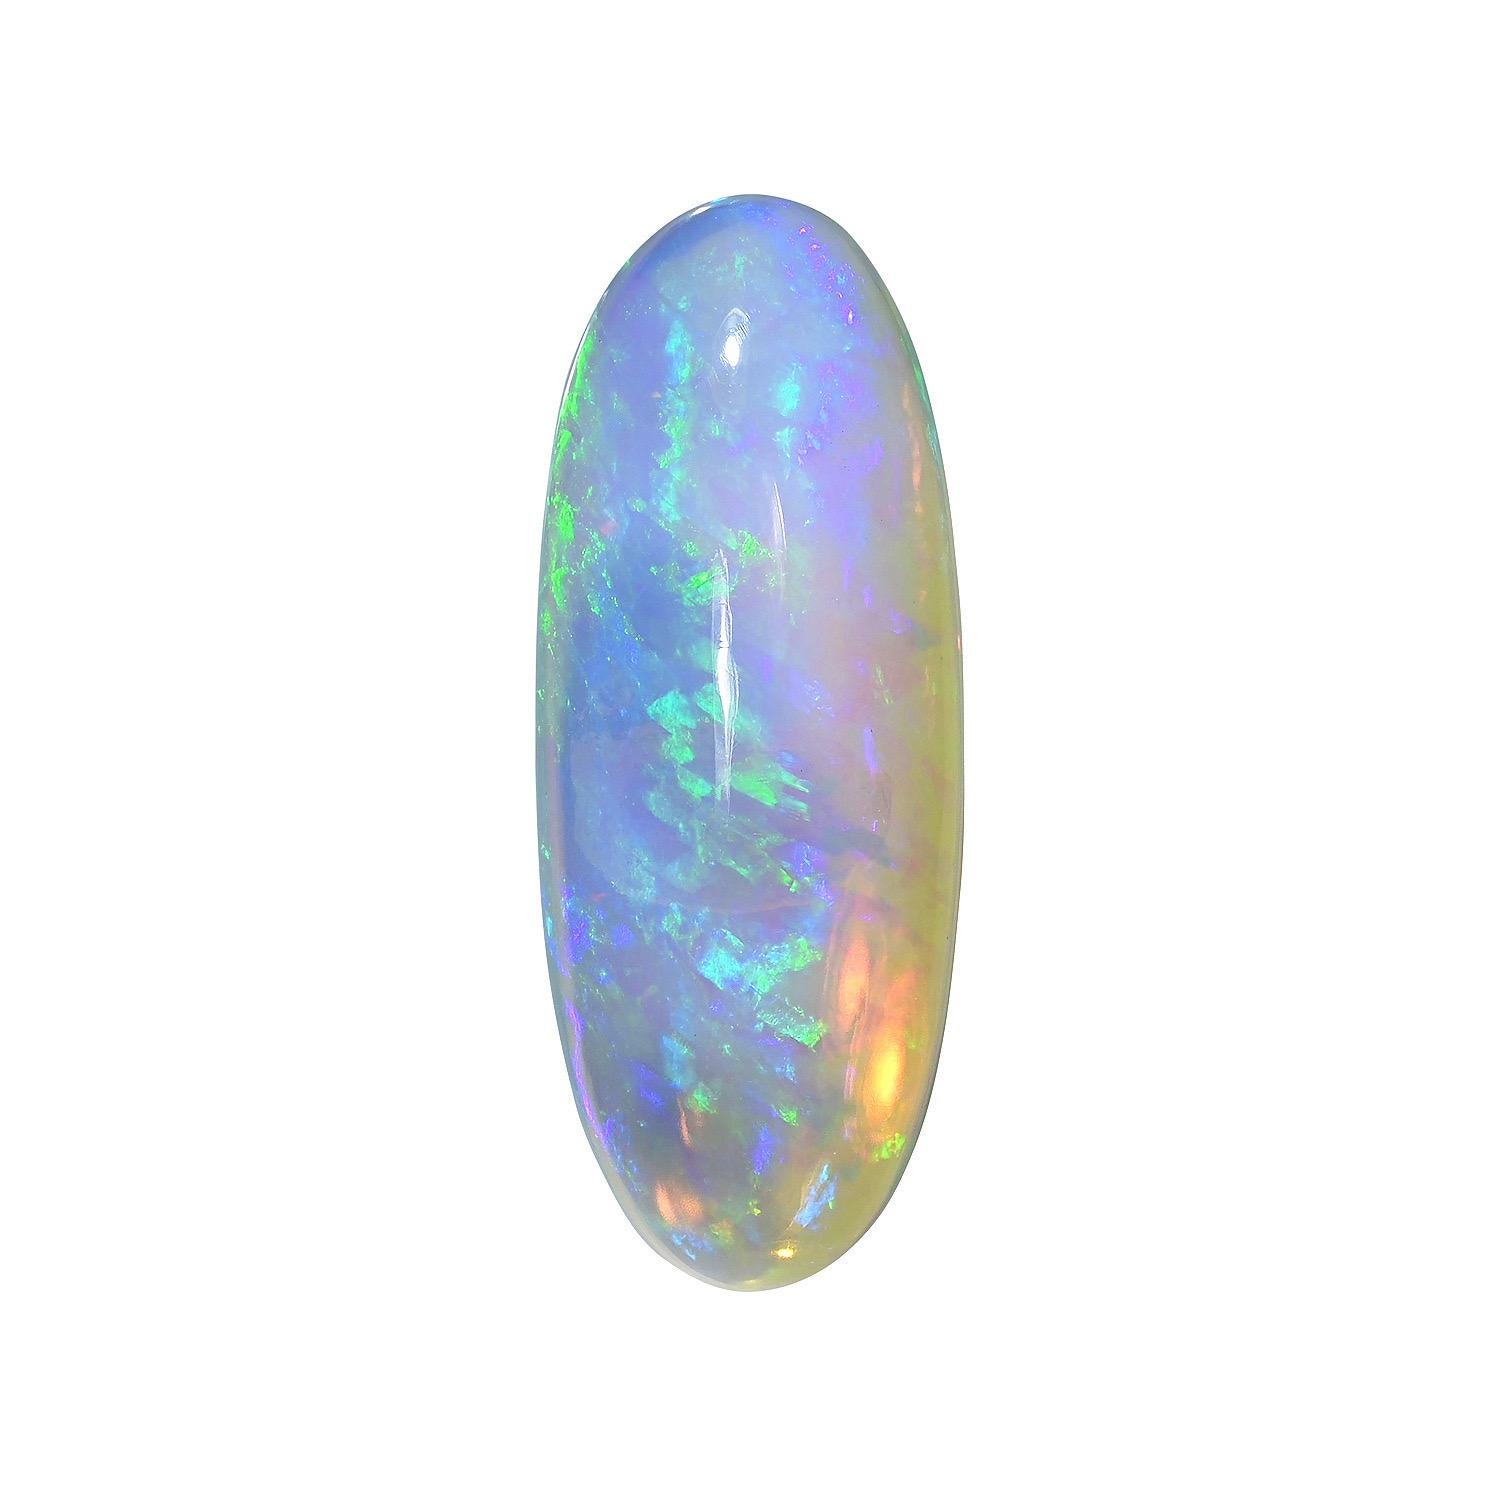 Natural 27.42 carat oval Ethiopian Opal loose gemstone, offered unmounted to an avid gem collector.
Returns are accepted and paid by us within 7 days of delivery.
We offer supreme custom jewelry work upon request. Please contact us for more